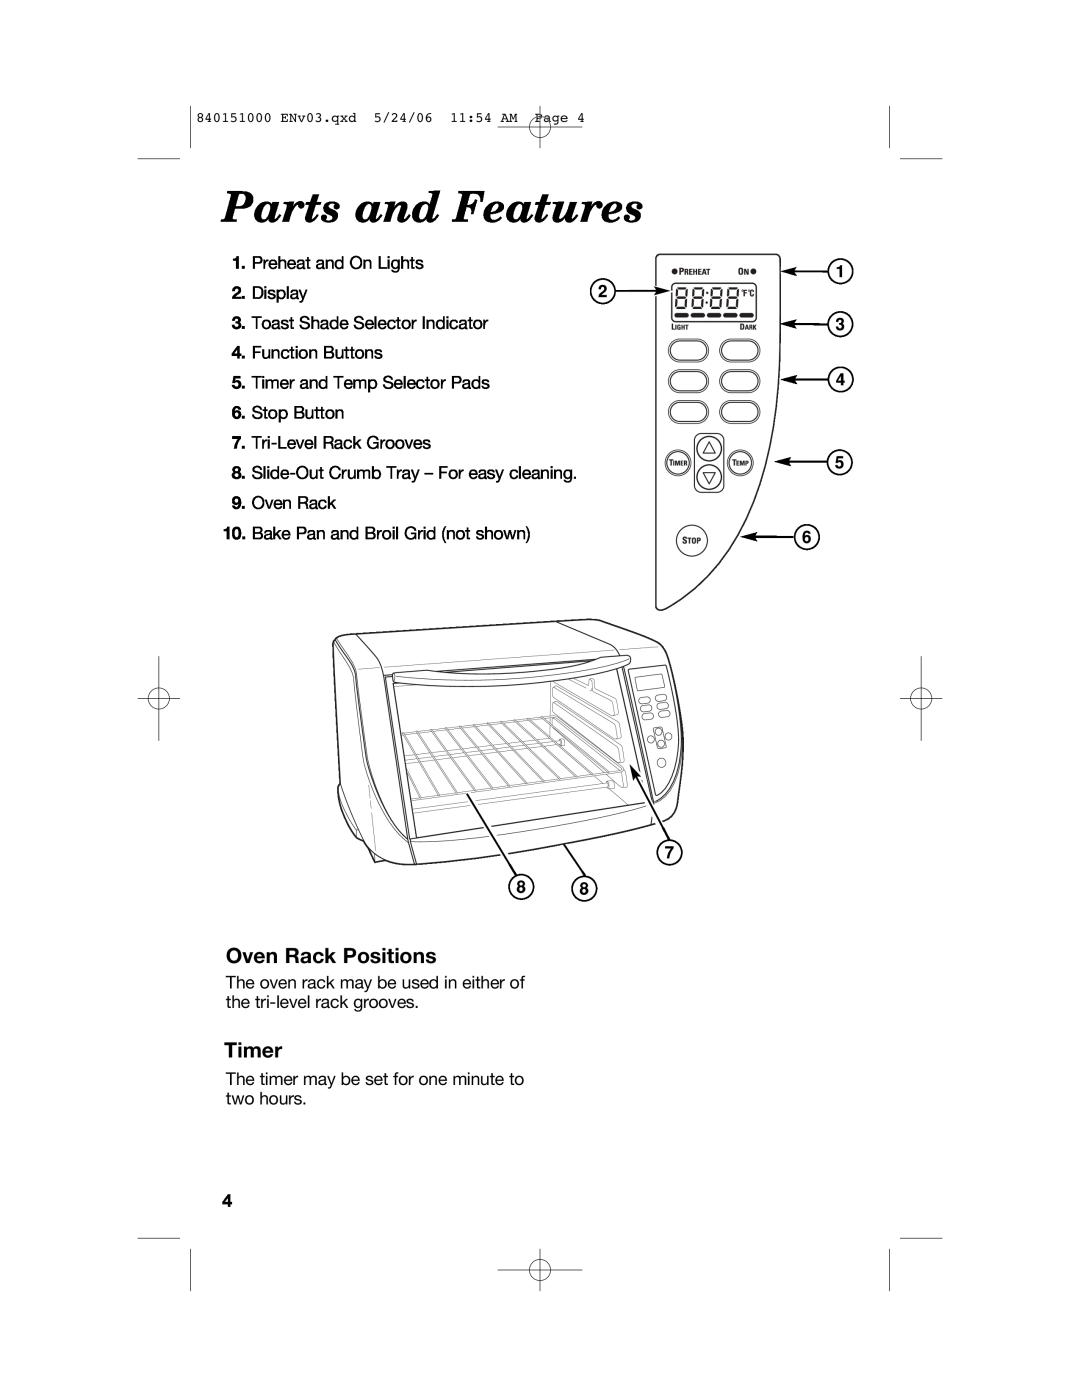 Hamilton Beach 840151000 manual Parts and Features, Oven Rack Positions, Timer 